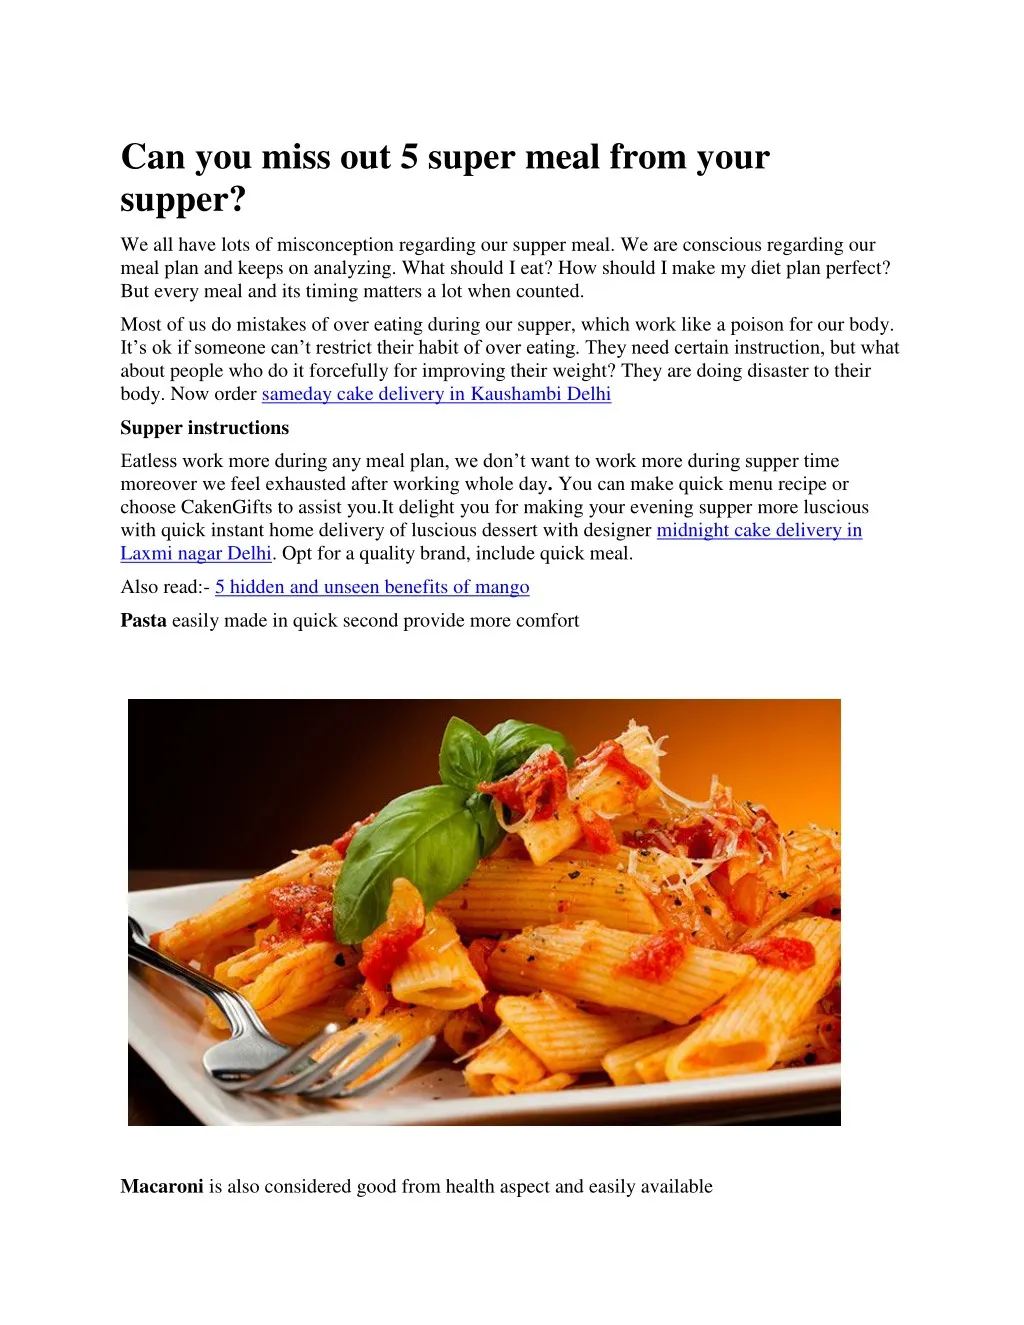 can you miss out 5 super meal from your supper